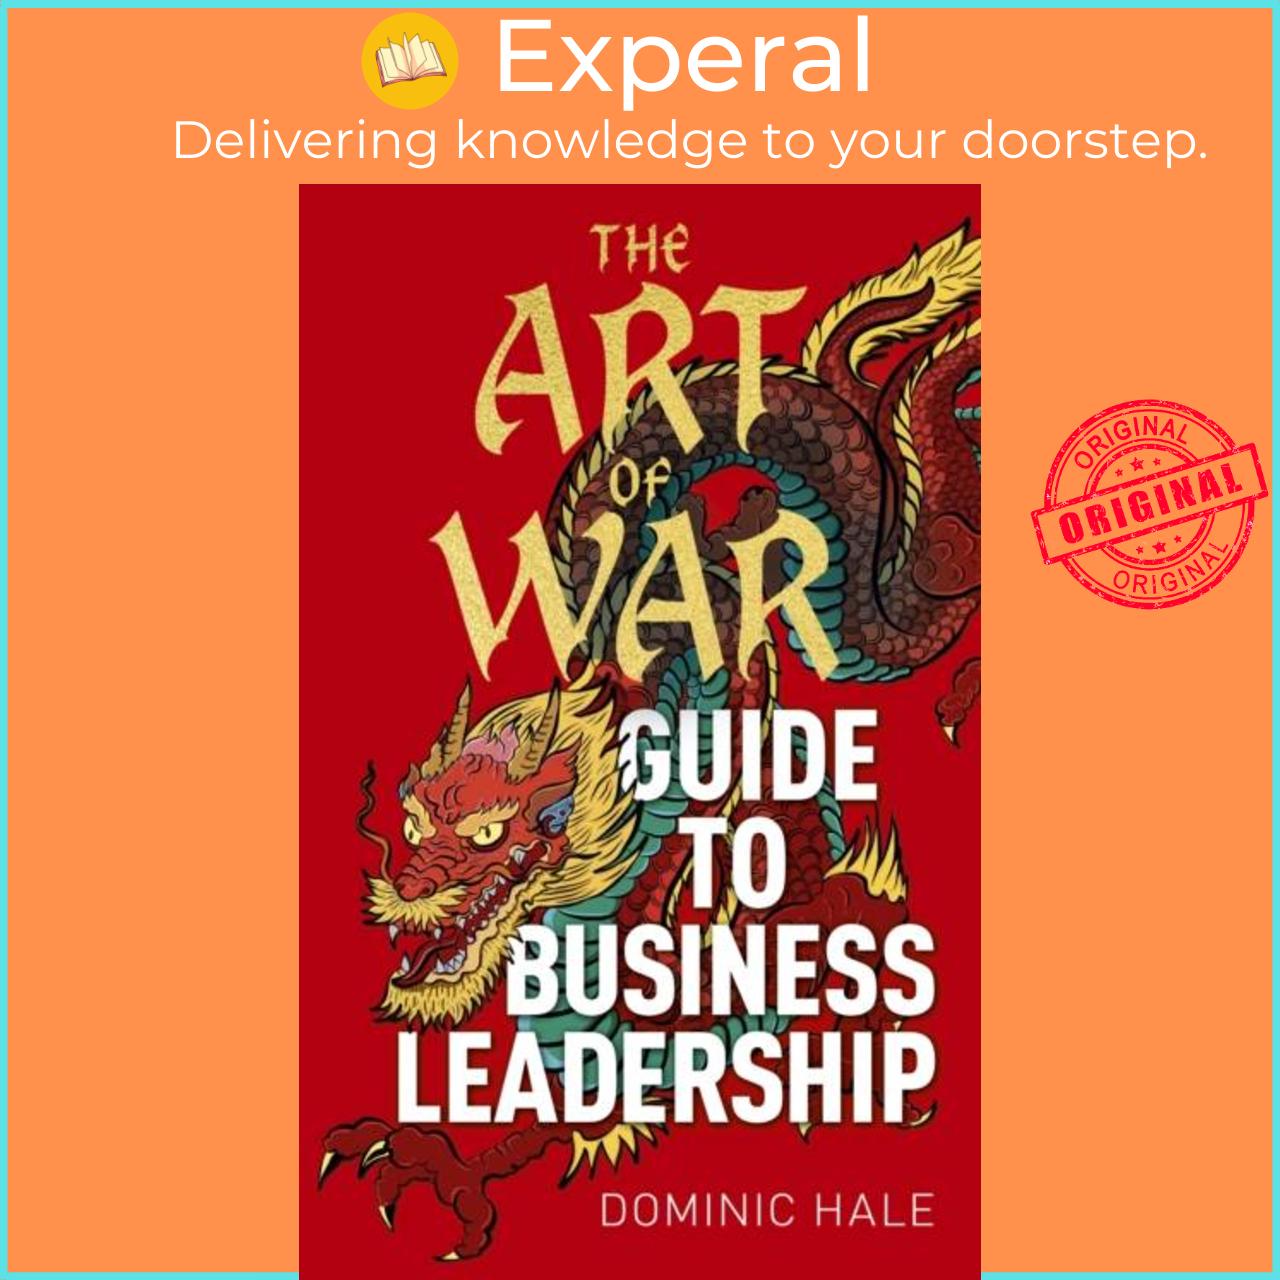 Hình ảnh Sách - The Art of War Guide to Business Leadership by Dominic Hale (UK edition, hardcover)